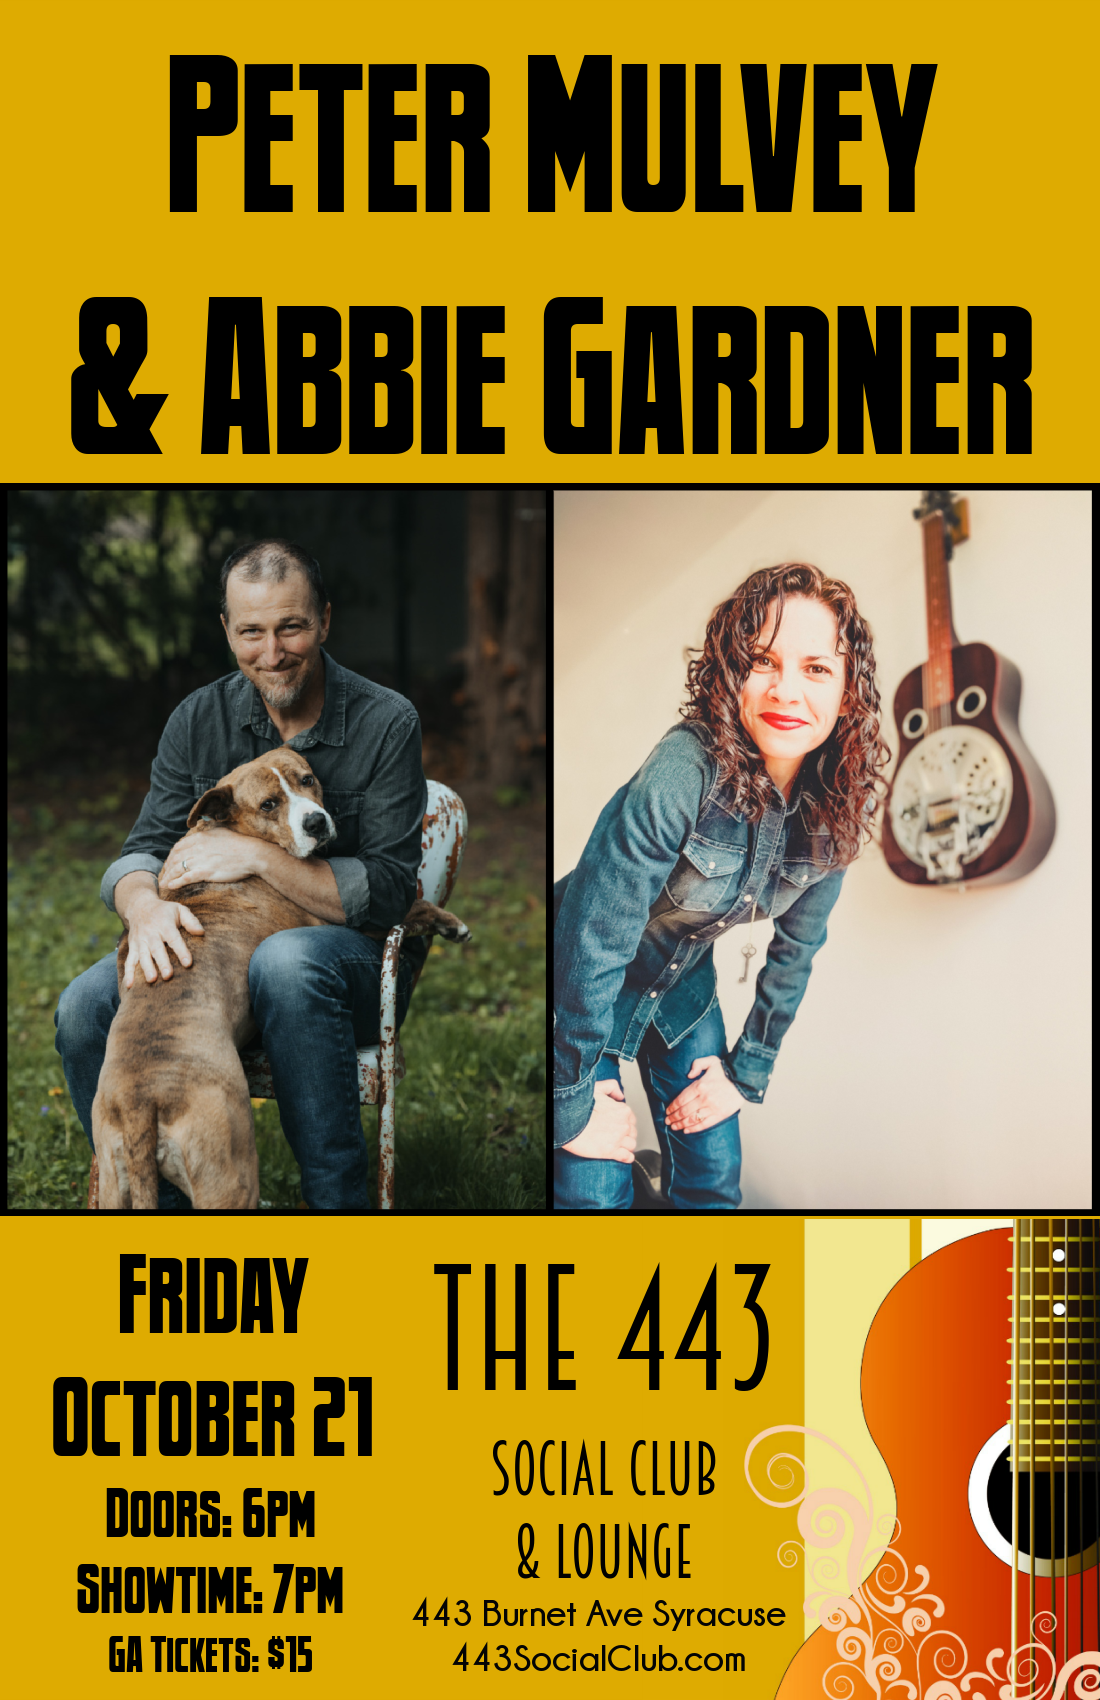 Peter Mulvey and Abbie Gardner at the 443